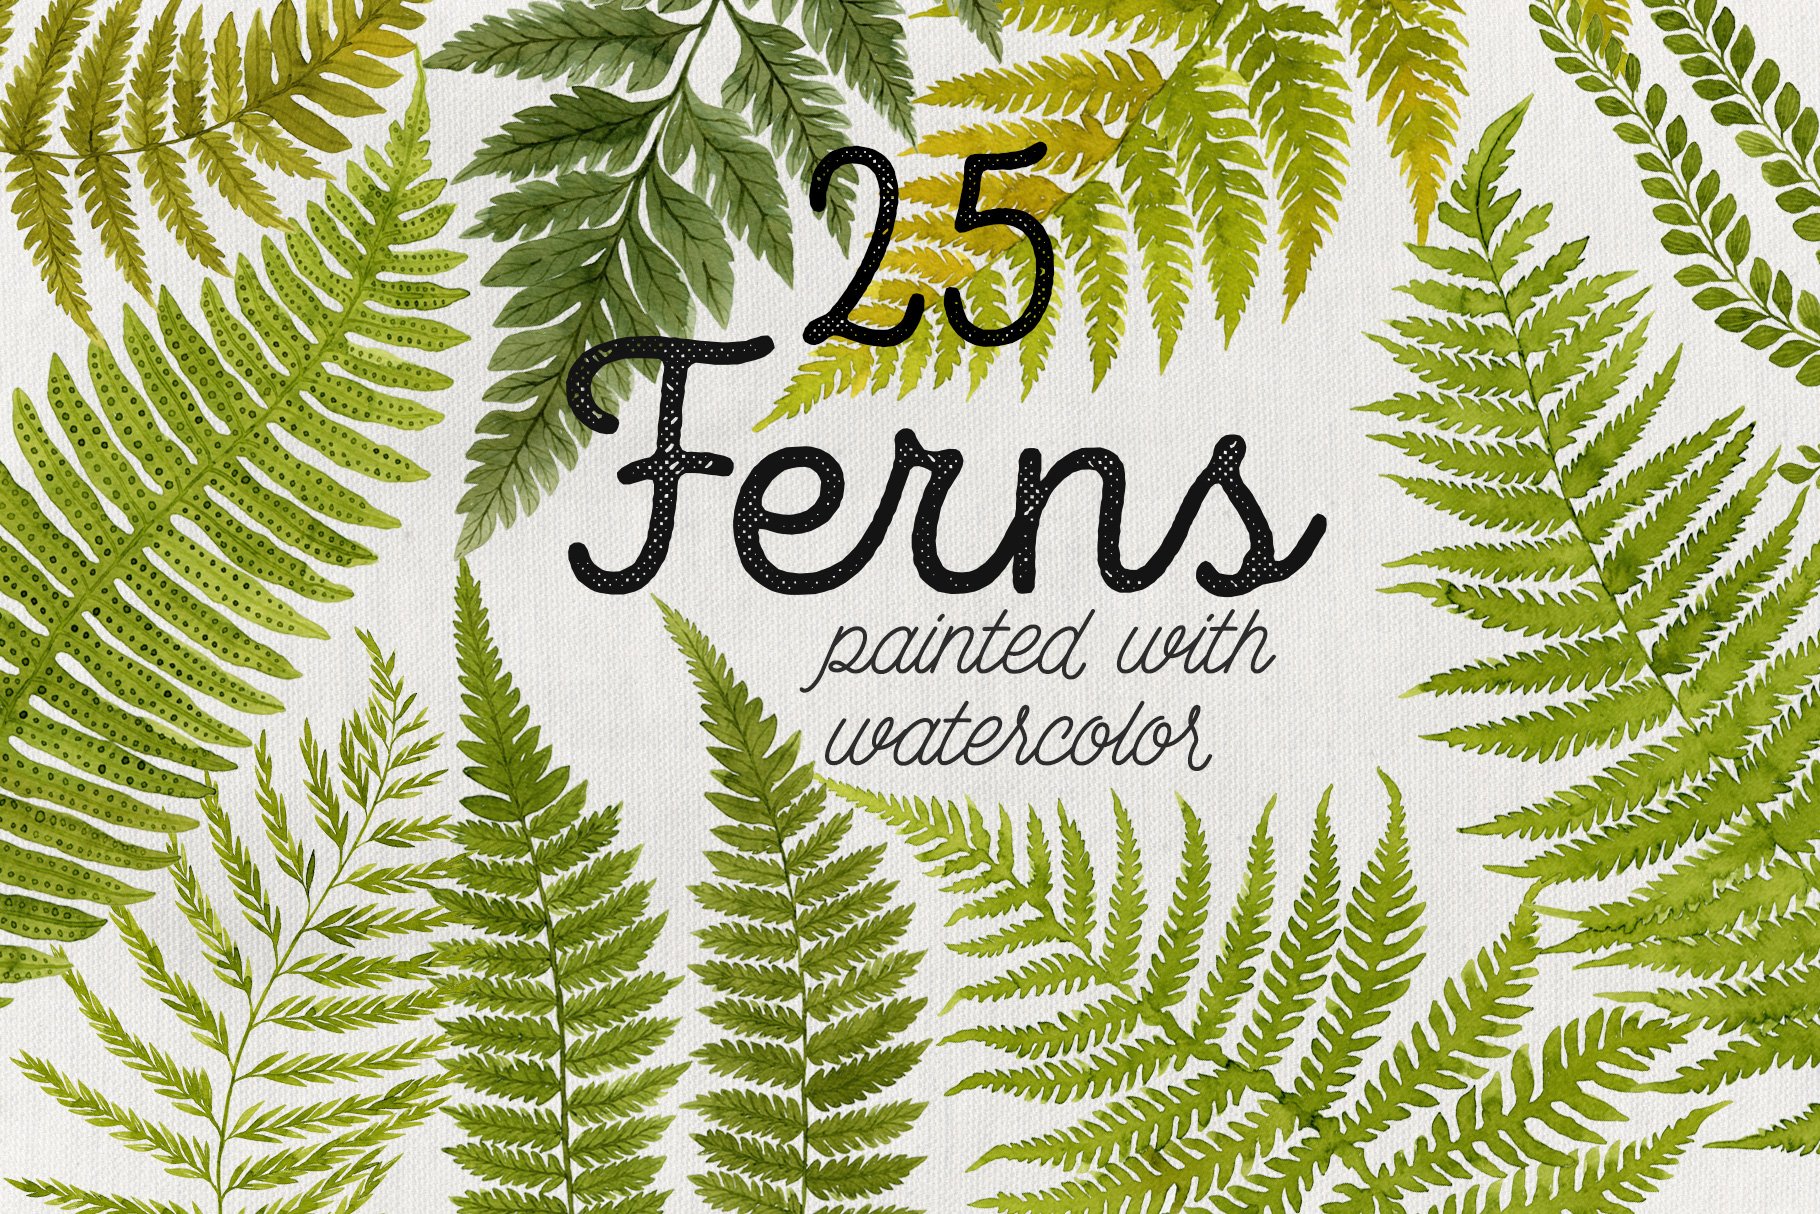 25 Watercolor Ferns cover image.